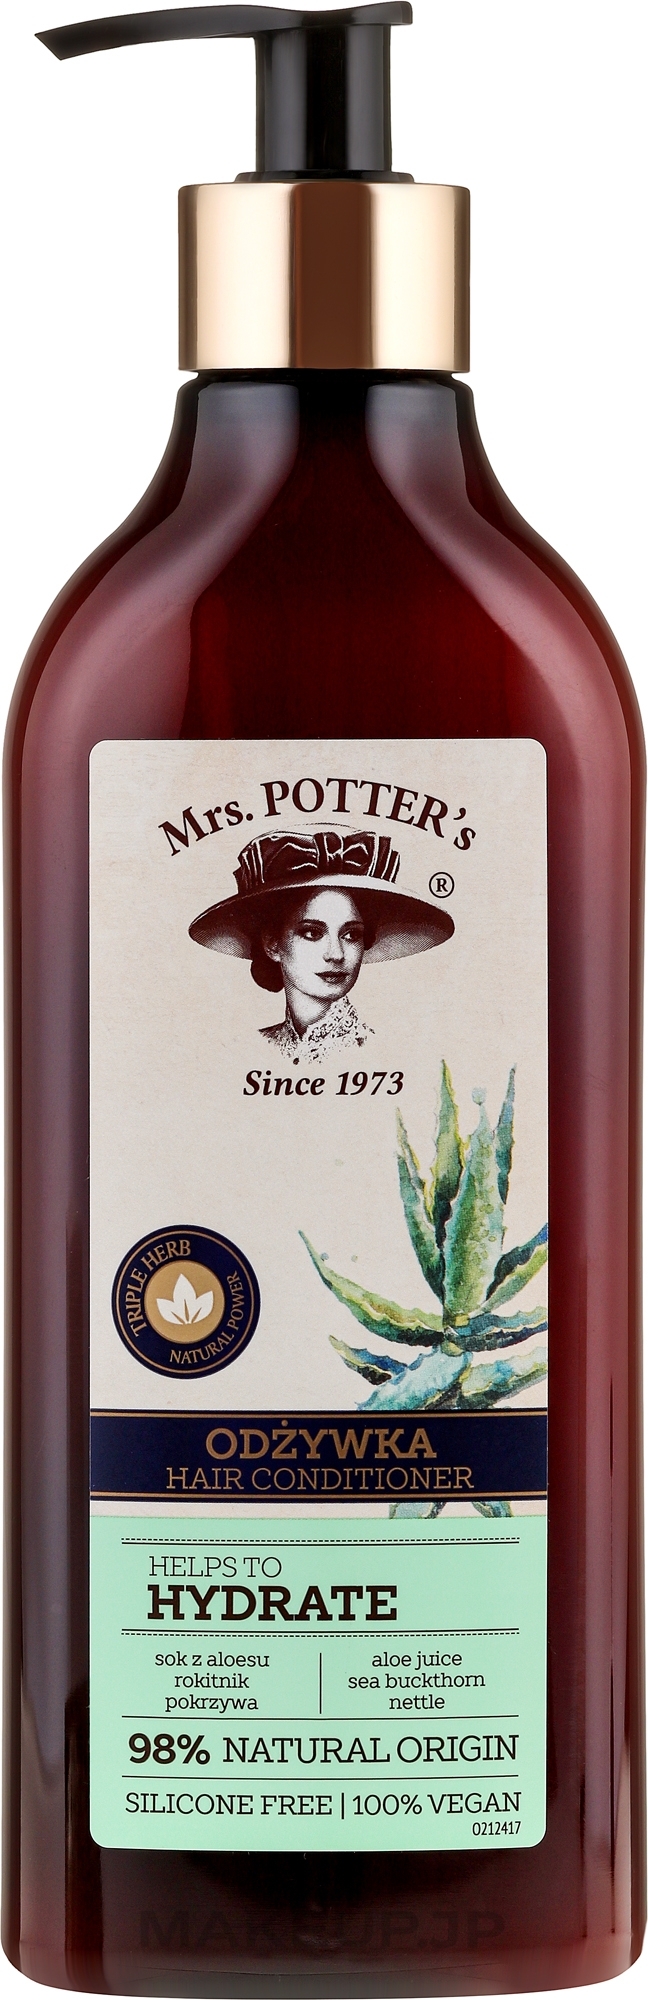 Hair Conditioner - Mrs. Potter's Helps To Hydrate Hair Conditioner — photo 390 ml